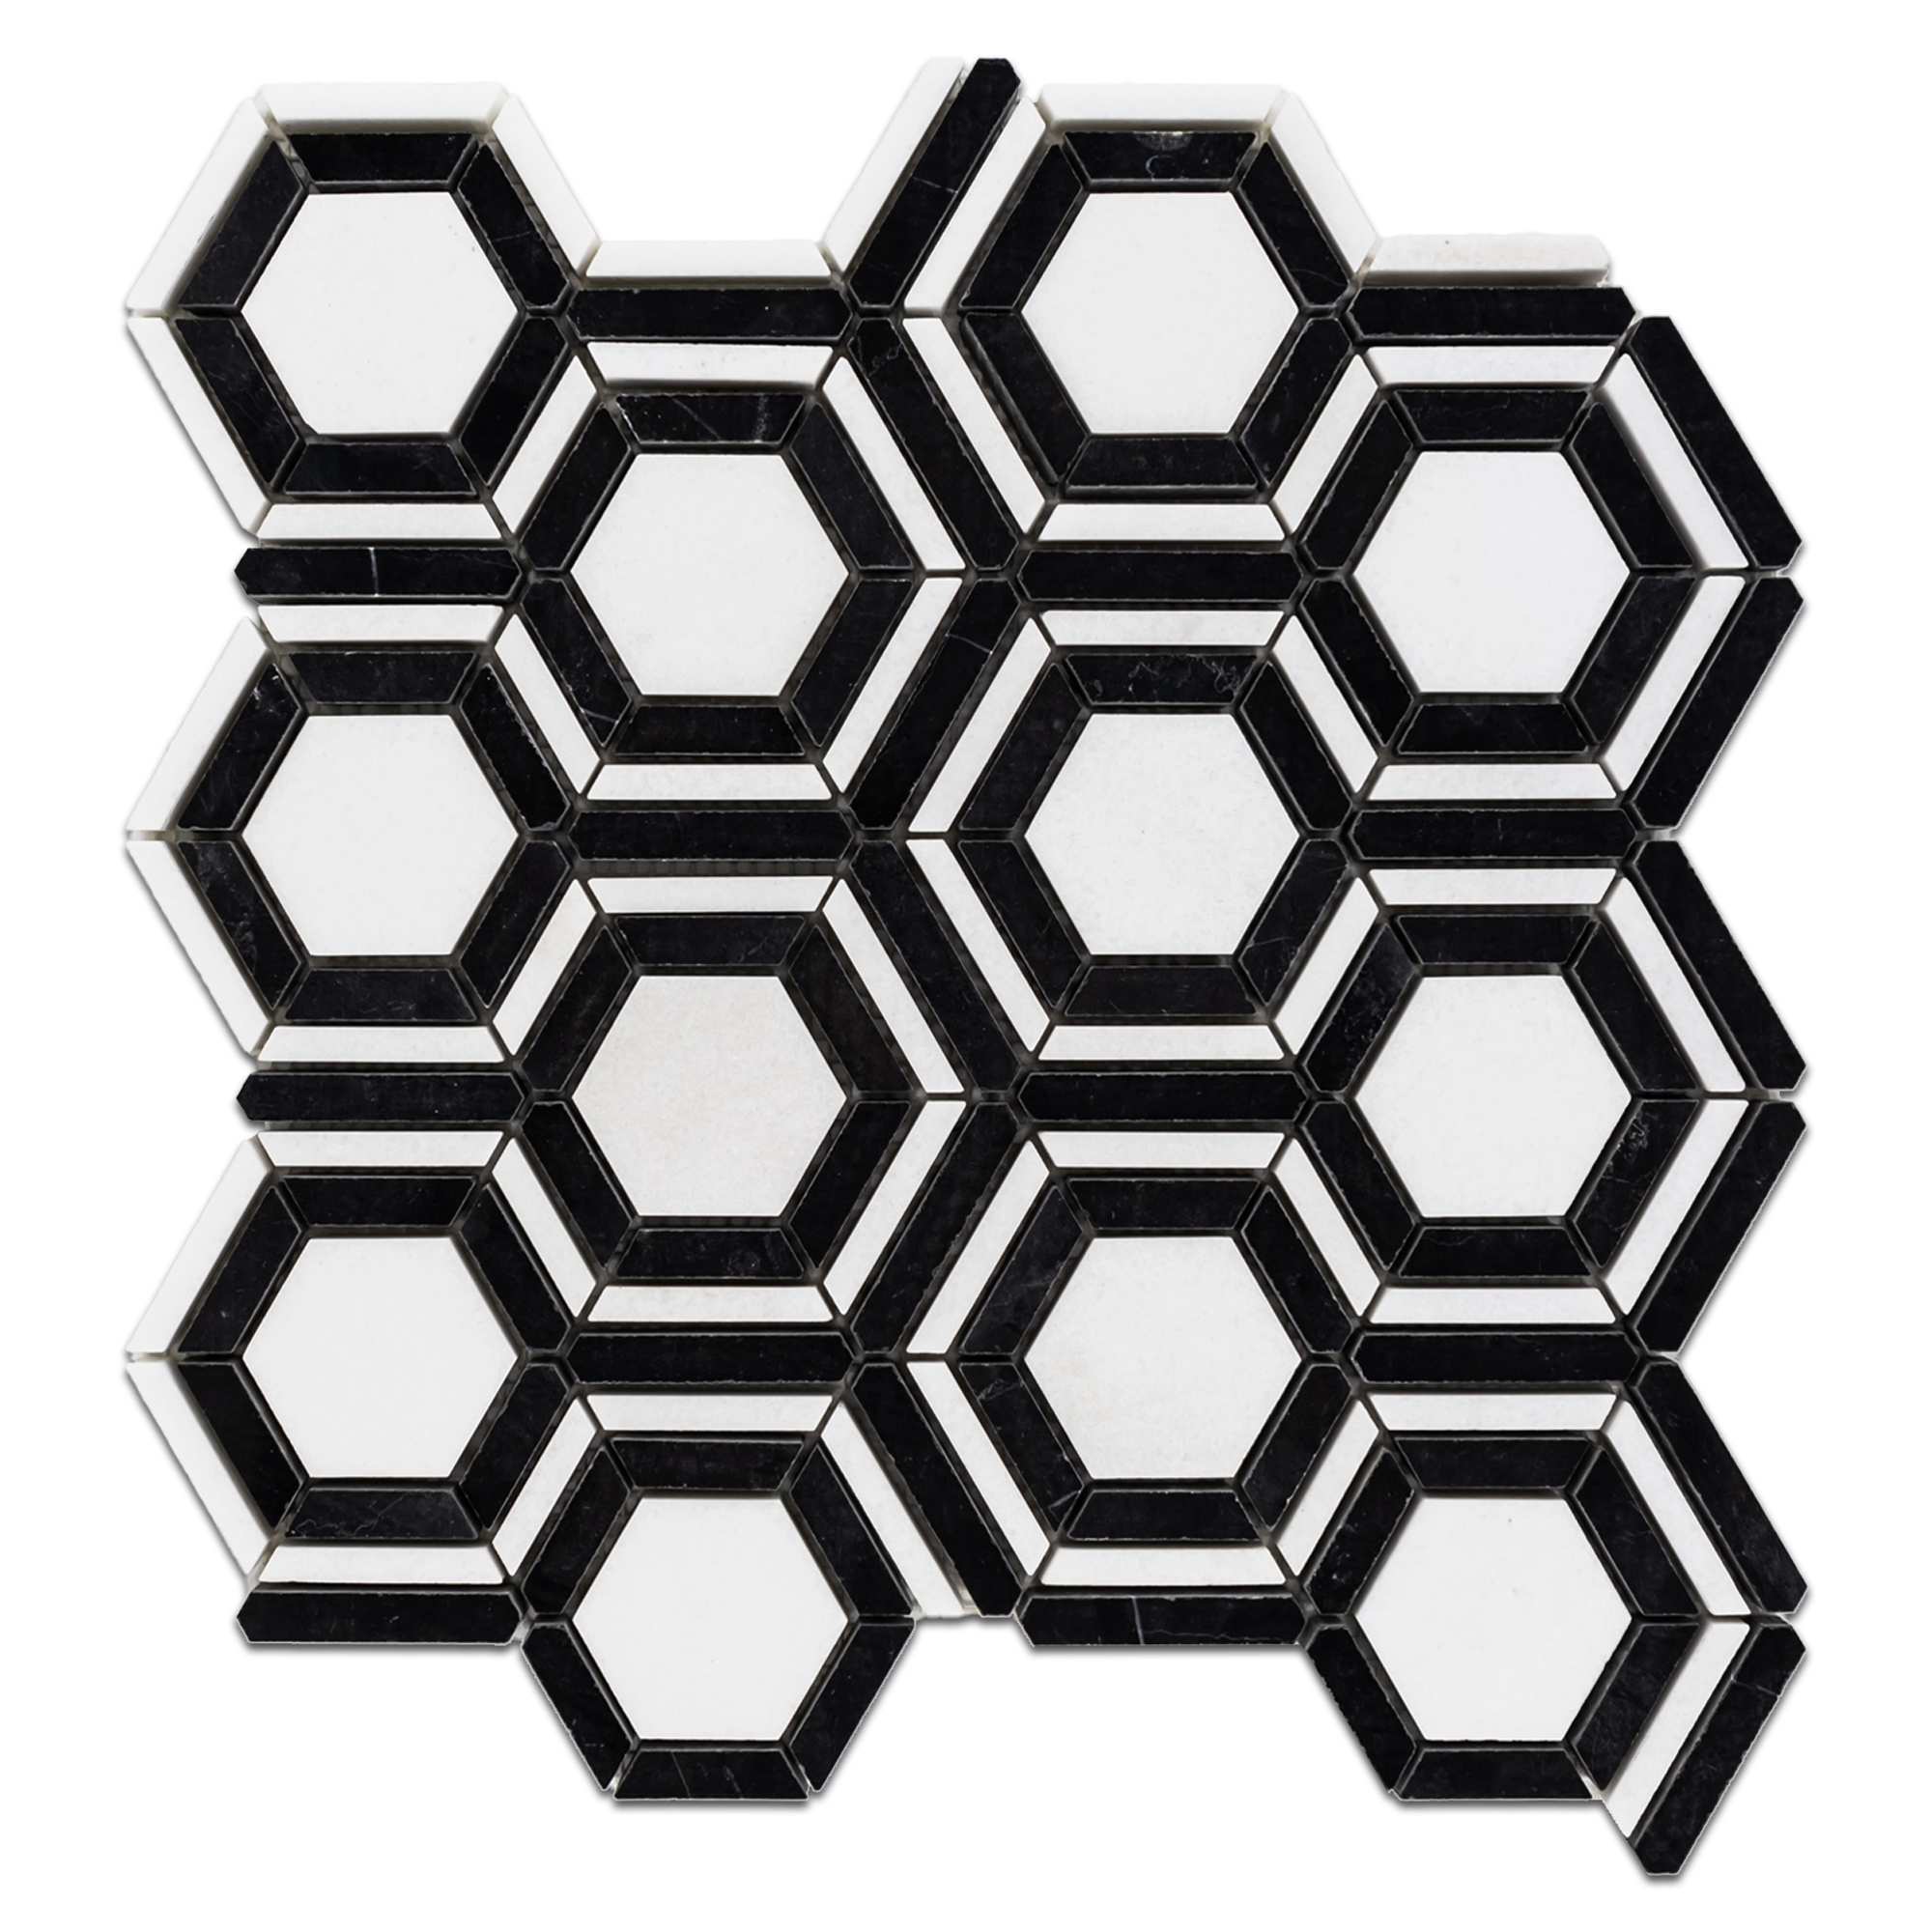 Elon White Thassos Black Marble Outlined Hexagon Field Mosaic 12.125x12.1875x0.375 Polished AM9060P Surface Group International Product